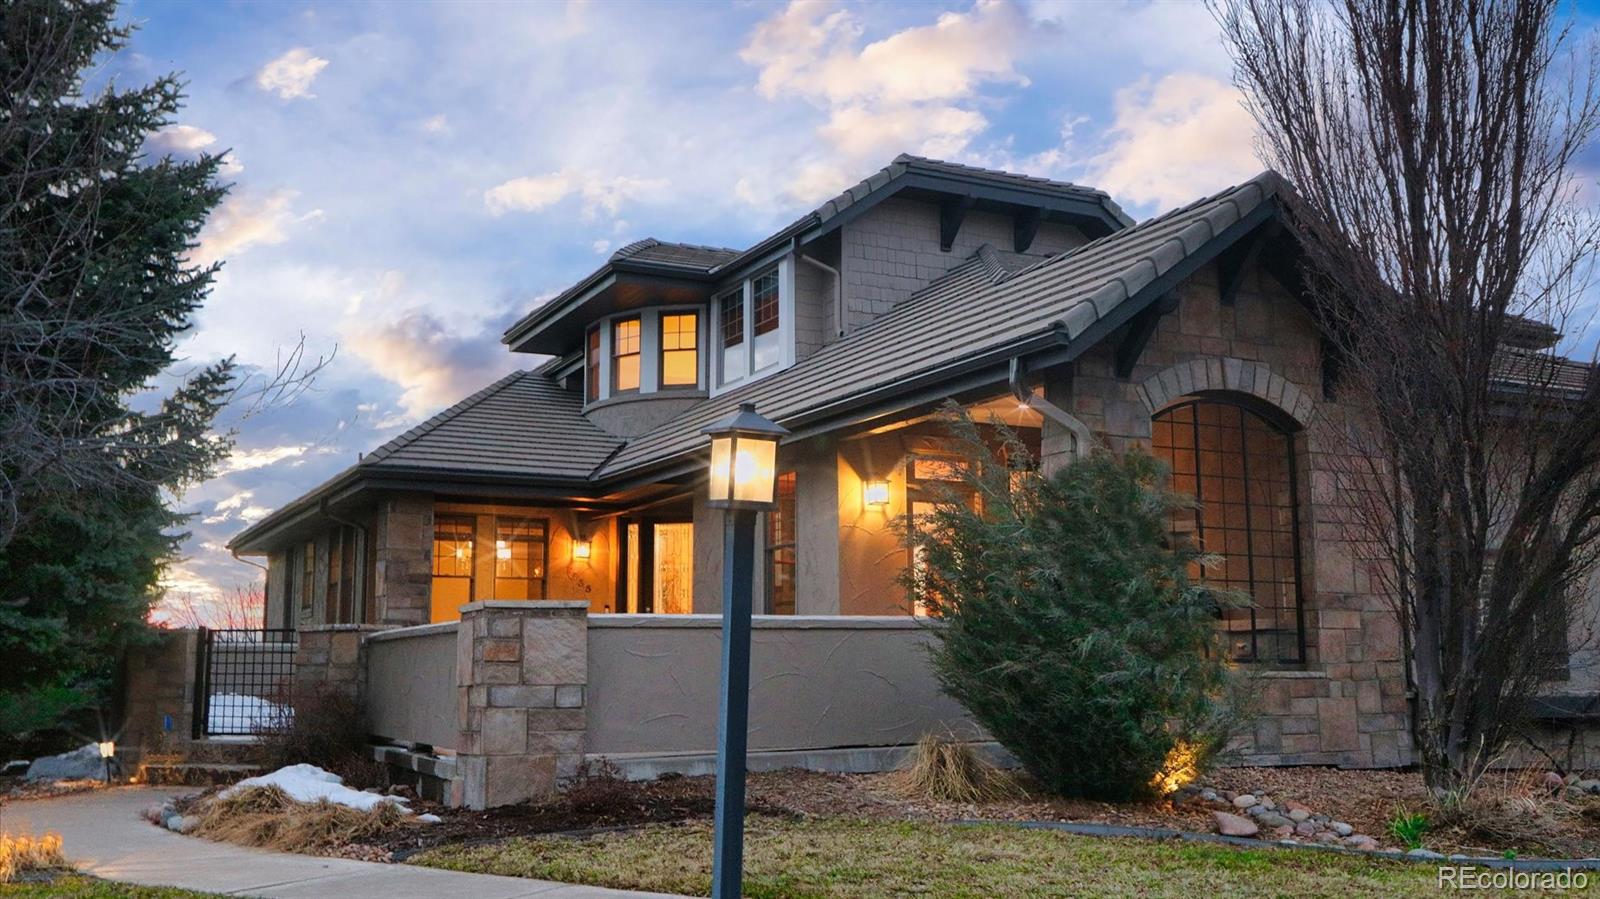 9535 S Shadow Hill Circle, lone tree MLS: 5992854 Beds: 5 Baths: 6 Price: $1,850,000